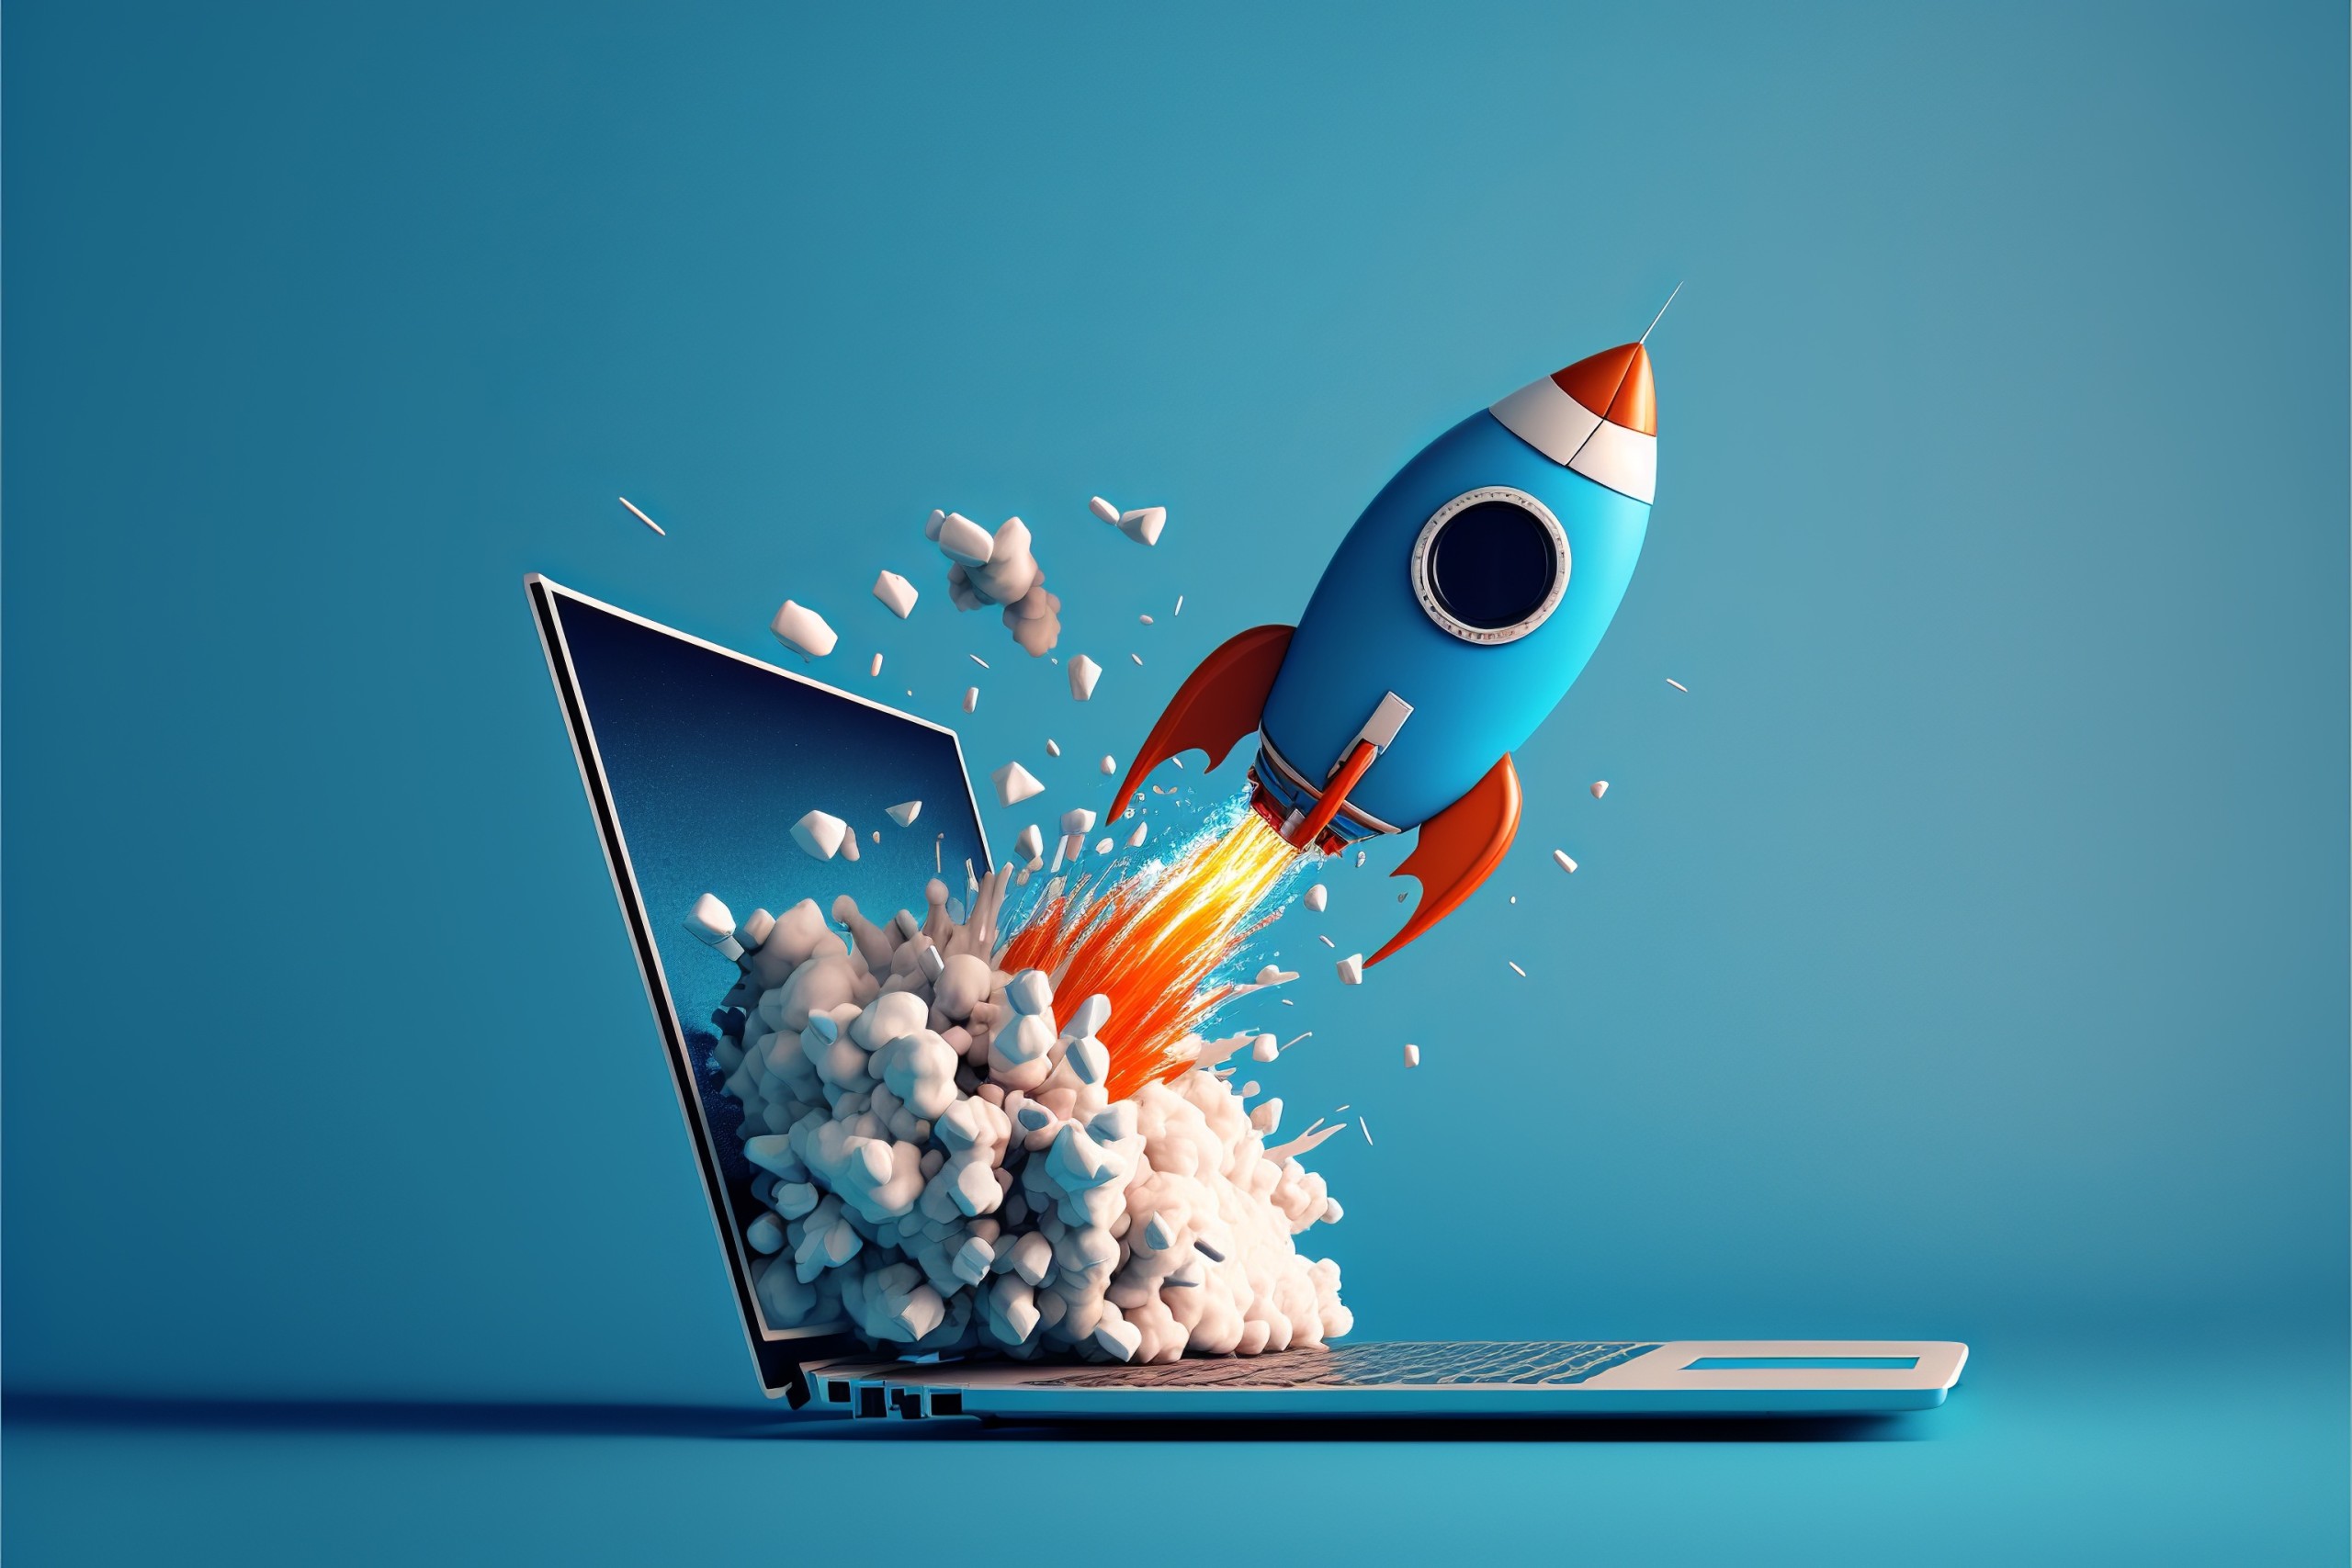 A cartoon style rocket blasting out of a laptop screen. In a light blue background